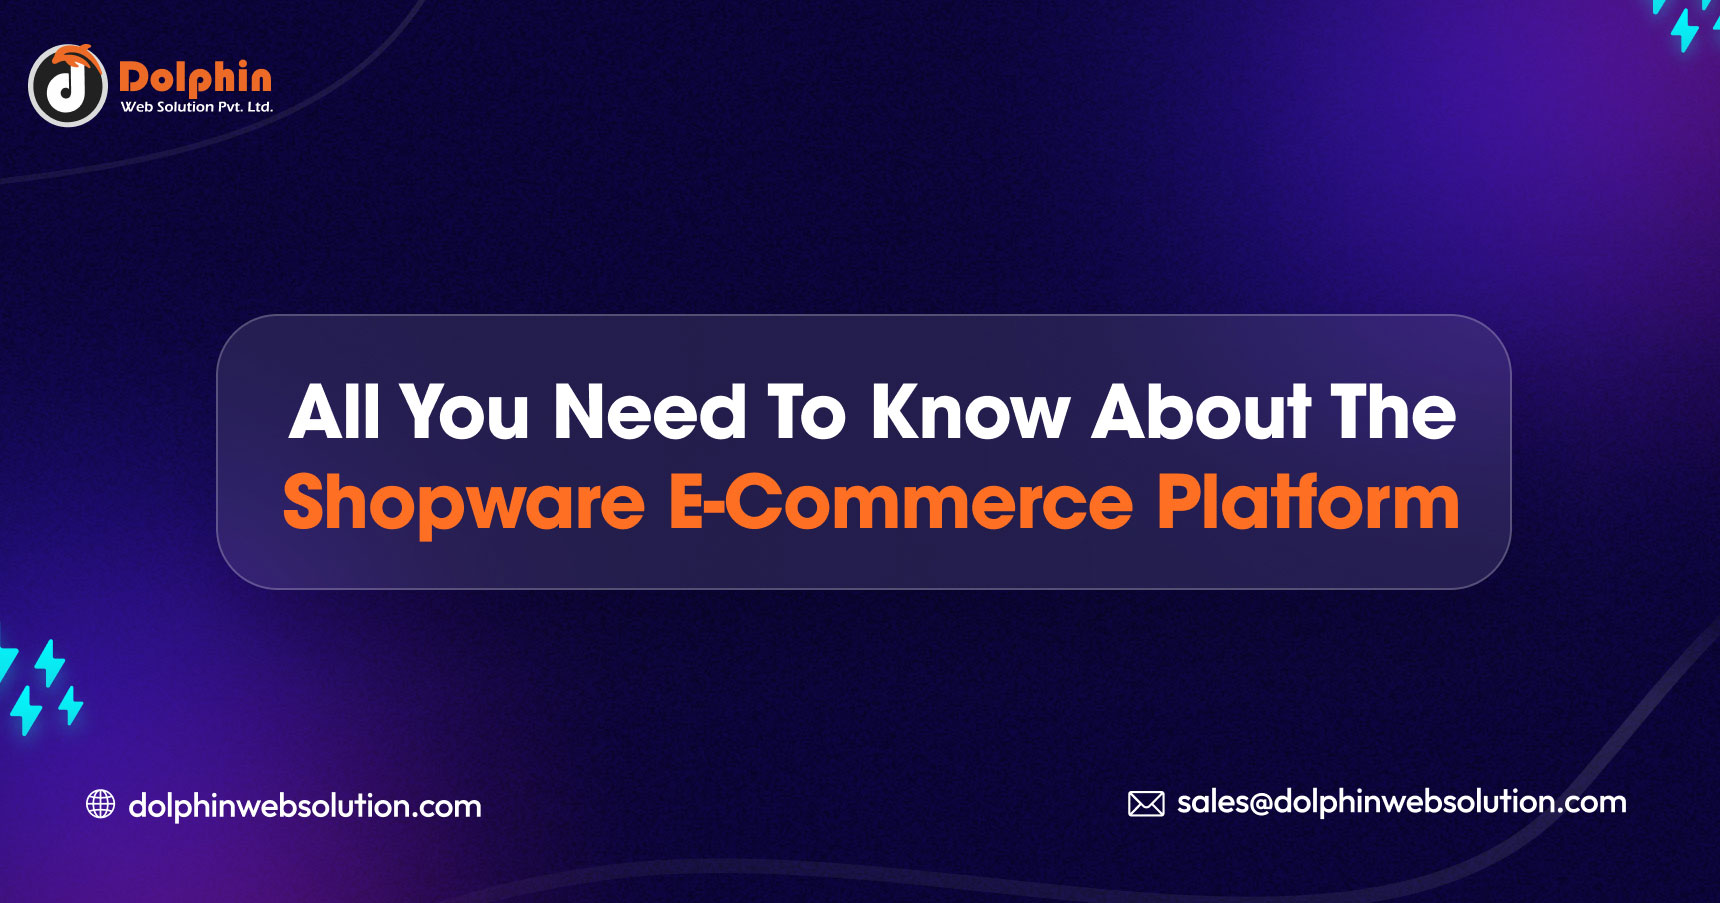 All You Need To Know About The Shopware eCommerce Platform